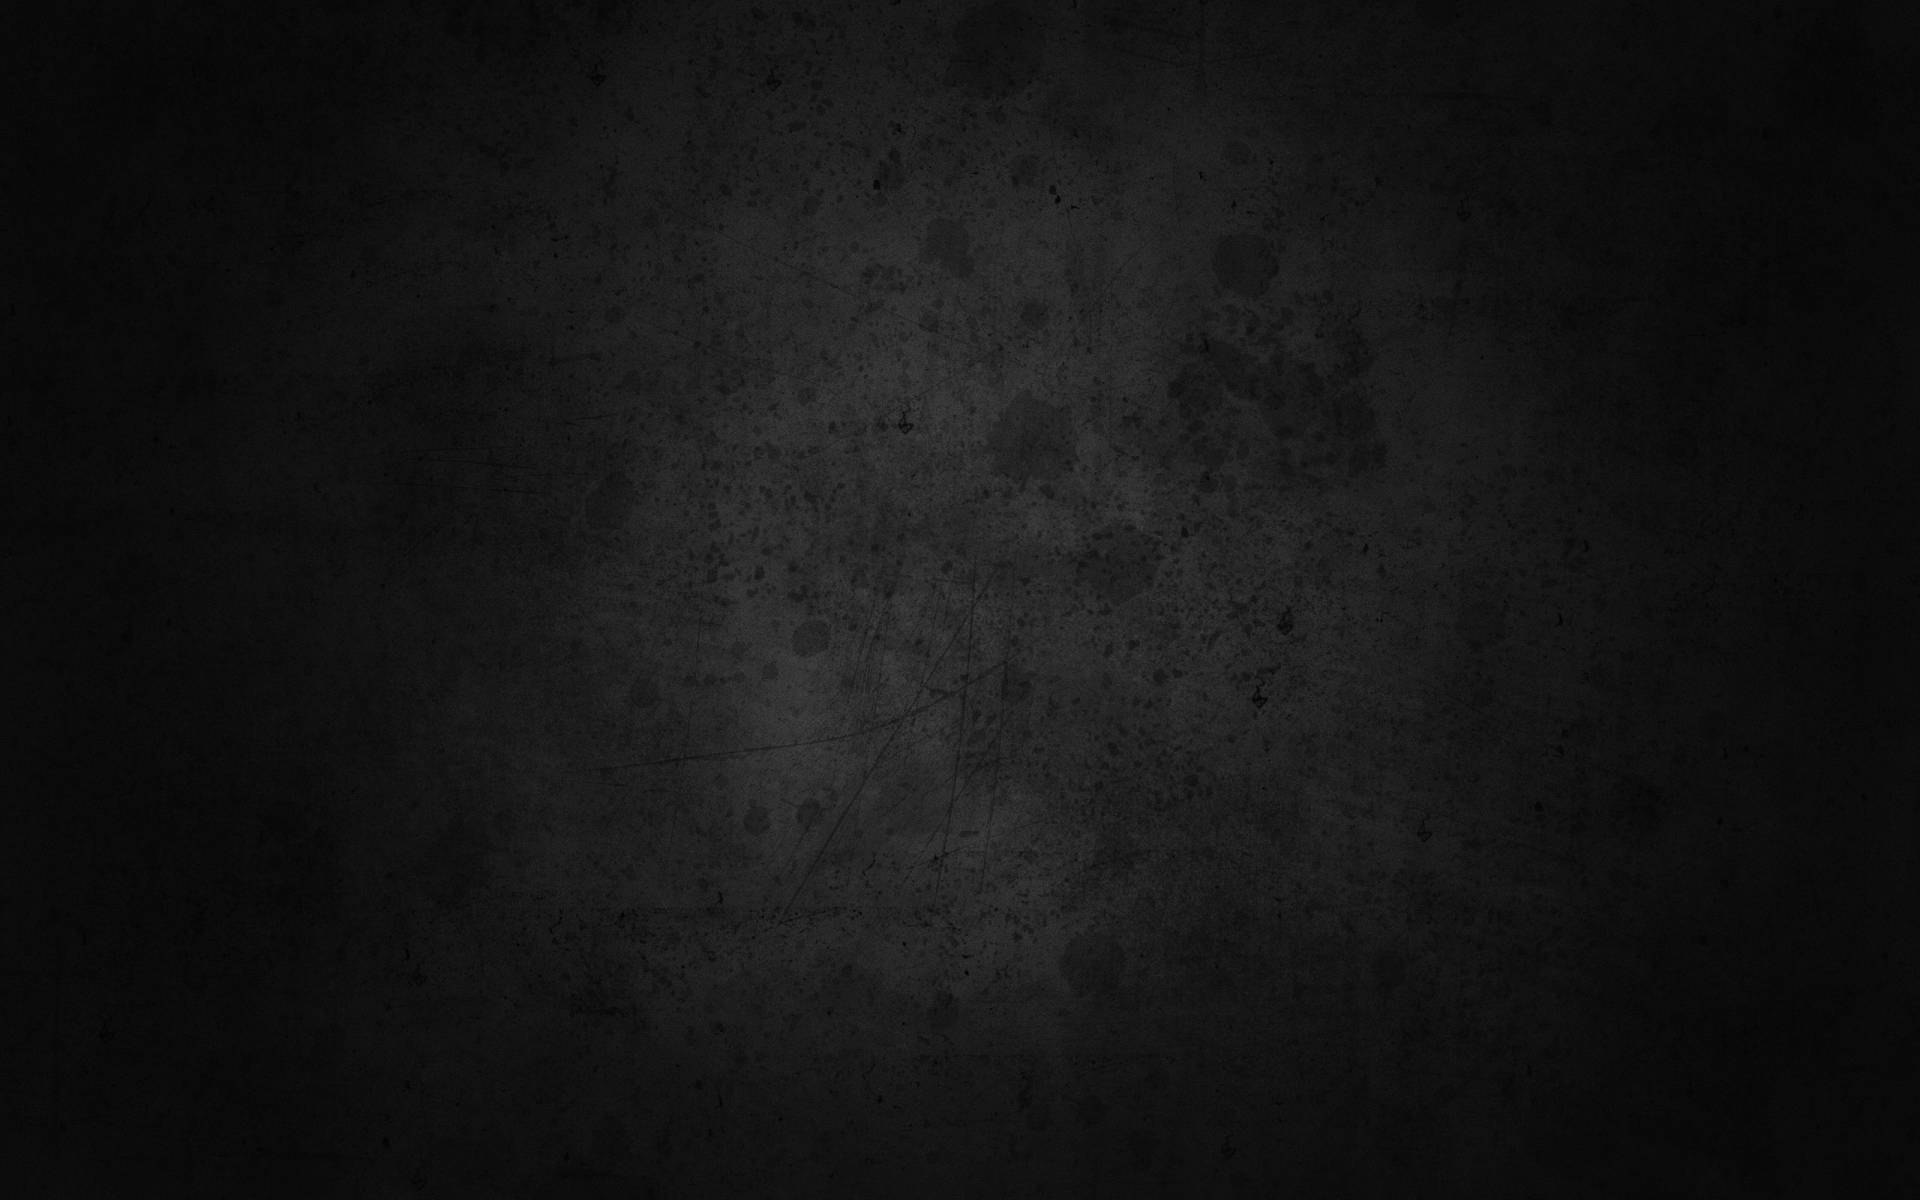 A Dark And Mysterious Plain Background